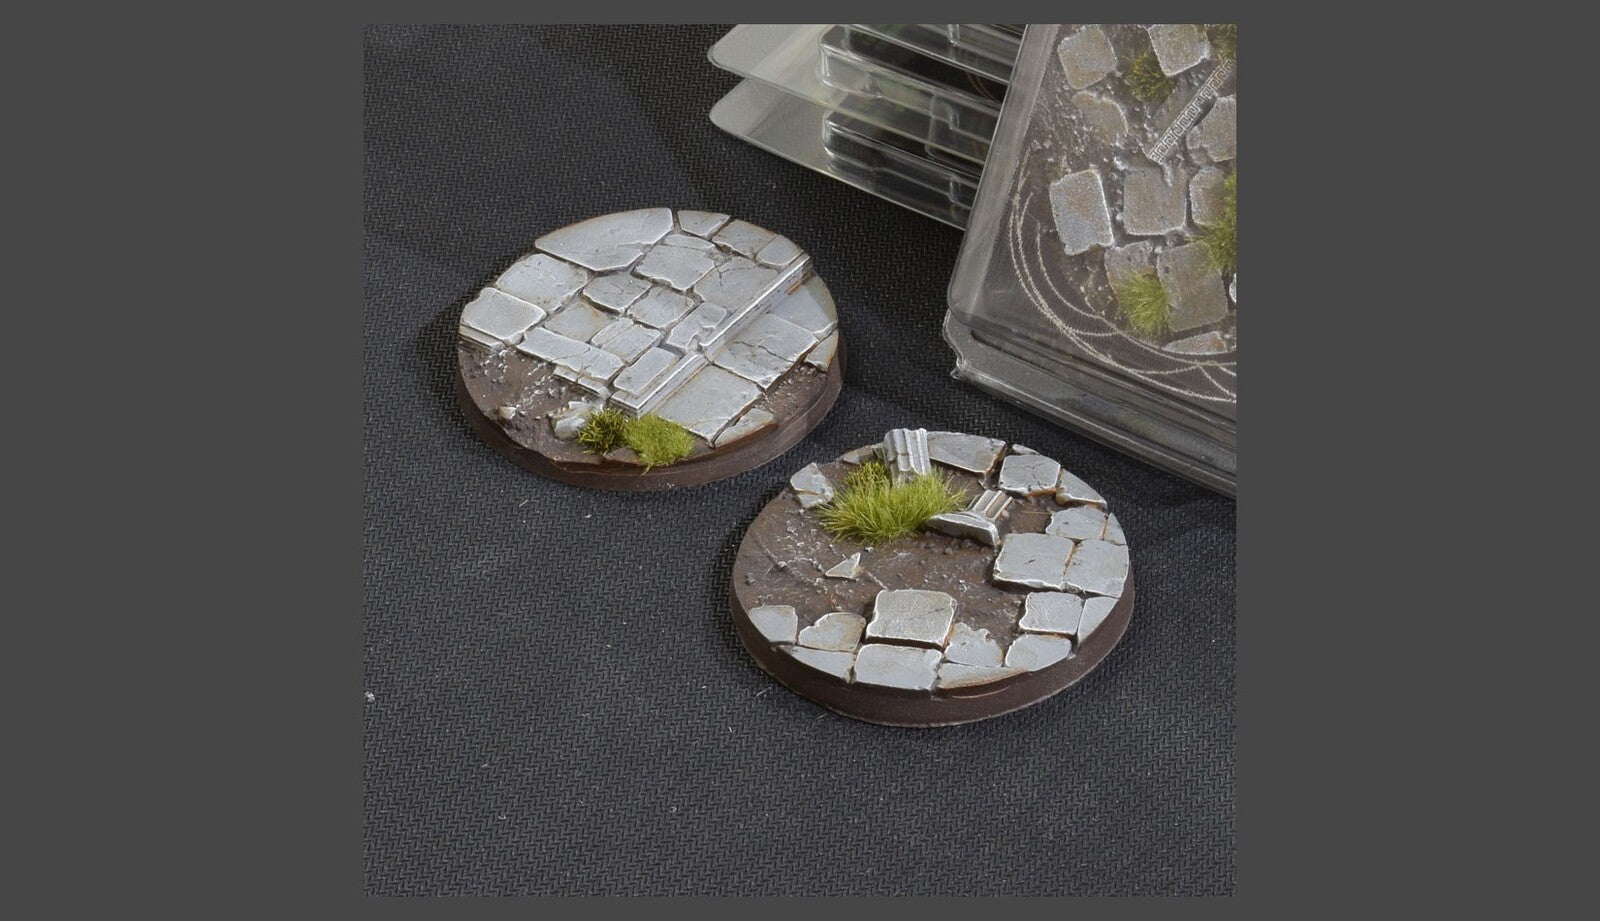 Temple Bases Round 60mm (x2)